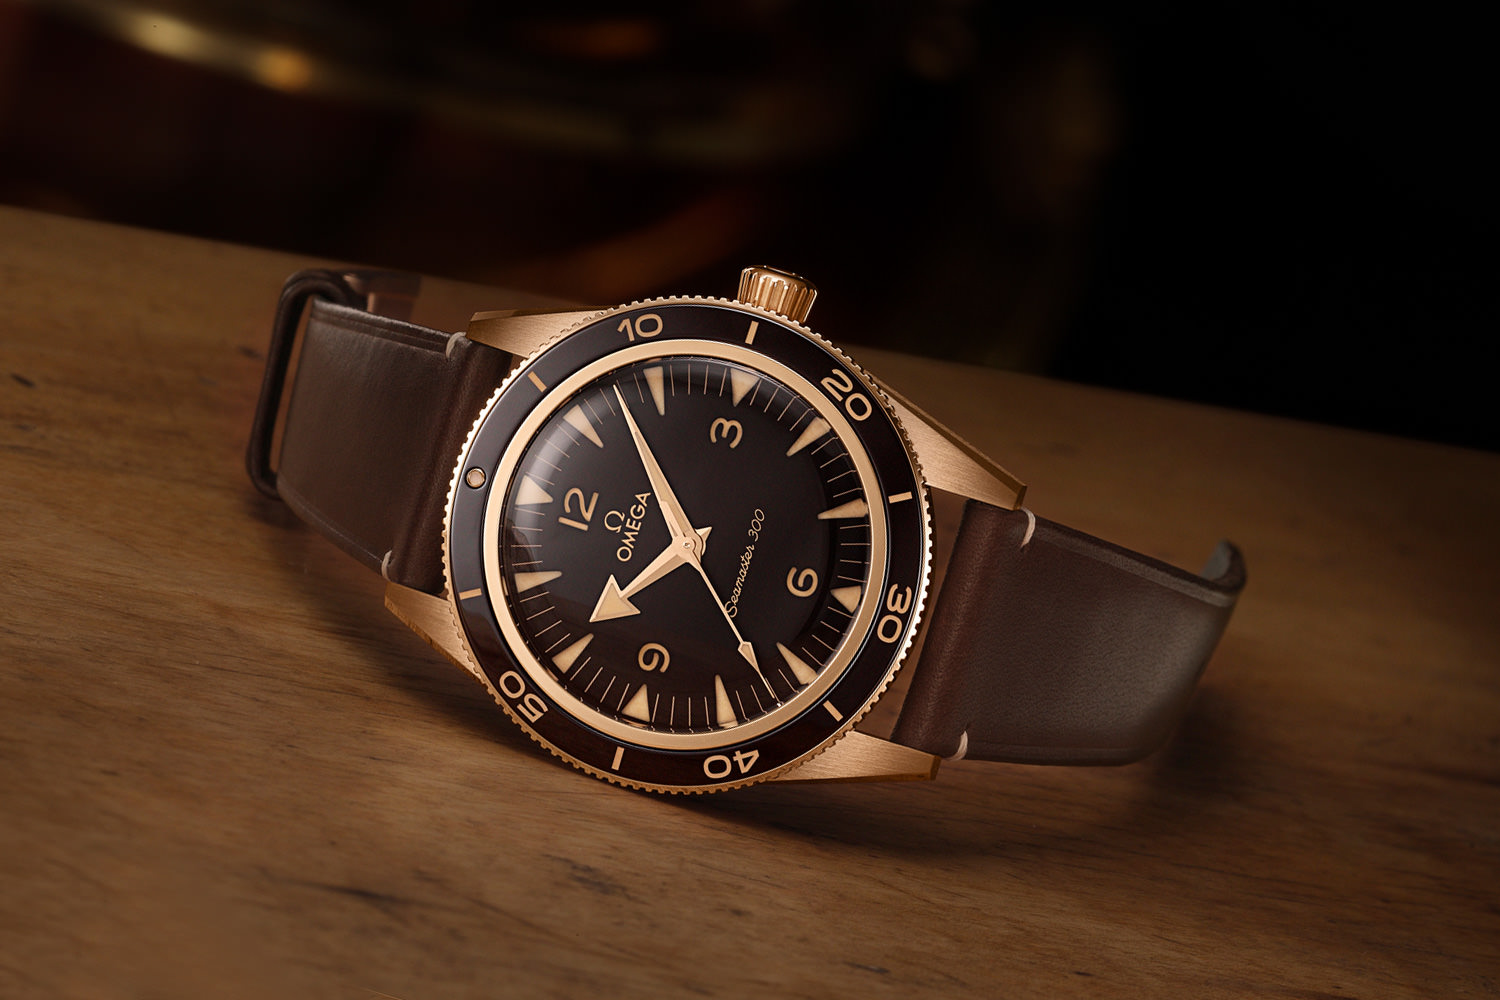 OMEGA SEAMASTER 300 Bronze Gold & Stainless Steel - VERY GREAT!